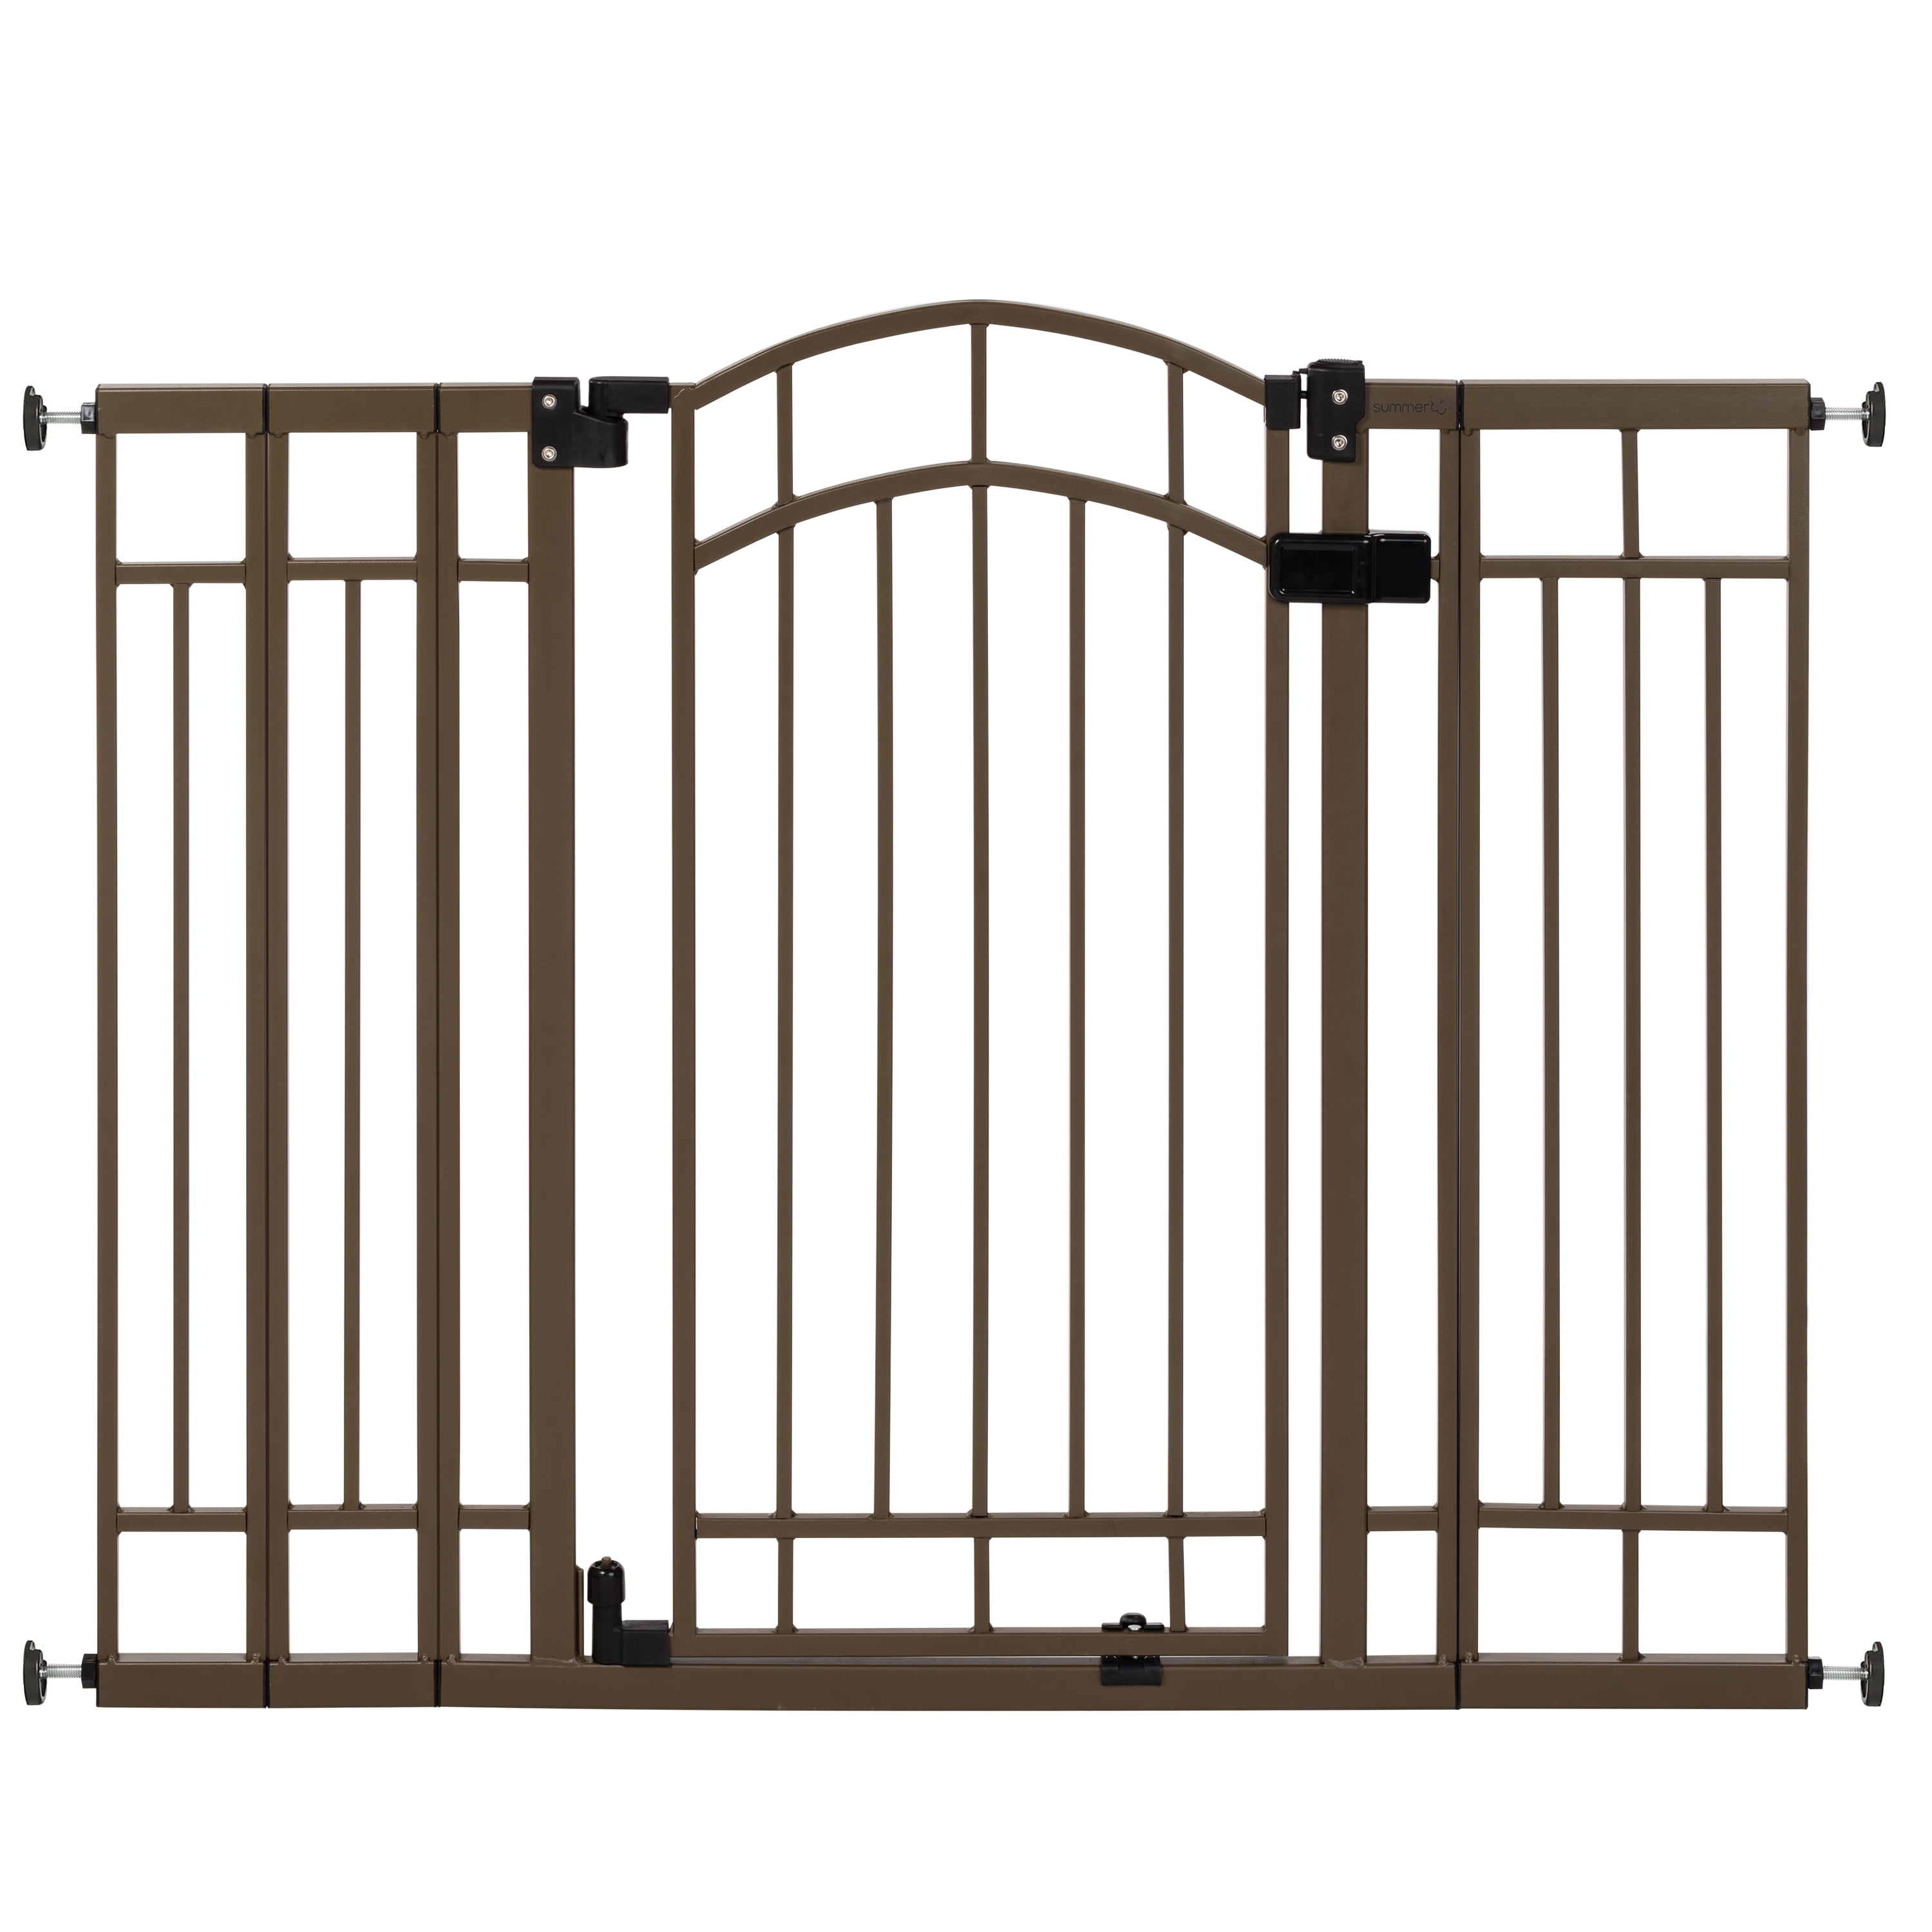 Photo 1 of (MISSING ACCESSORIES/HARDWARE) Summer Multi-Use Decorative Extra Tall Walk-Thru Baby Gate, Metal, Bronze Finish - 36” Tall, Fits Openings up to 28.5” to 48” Wide, Baby and Pet Gate for Doorways and Stairways
